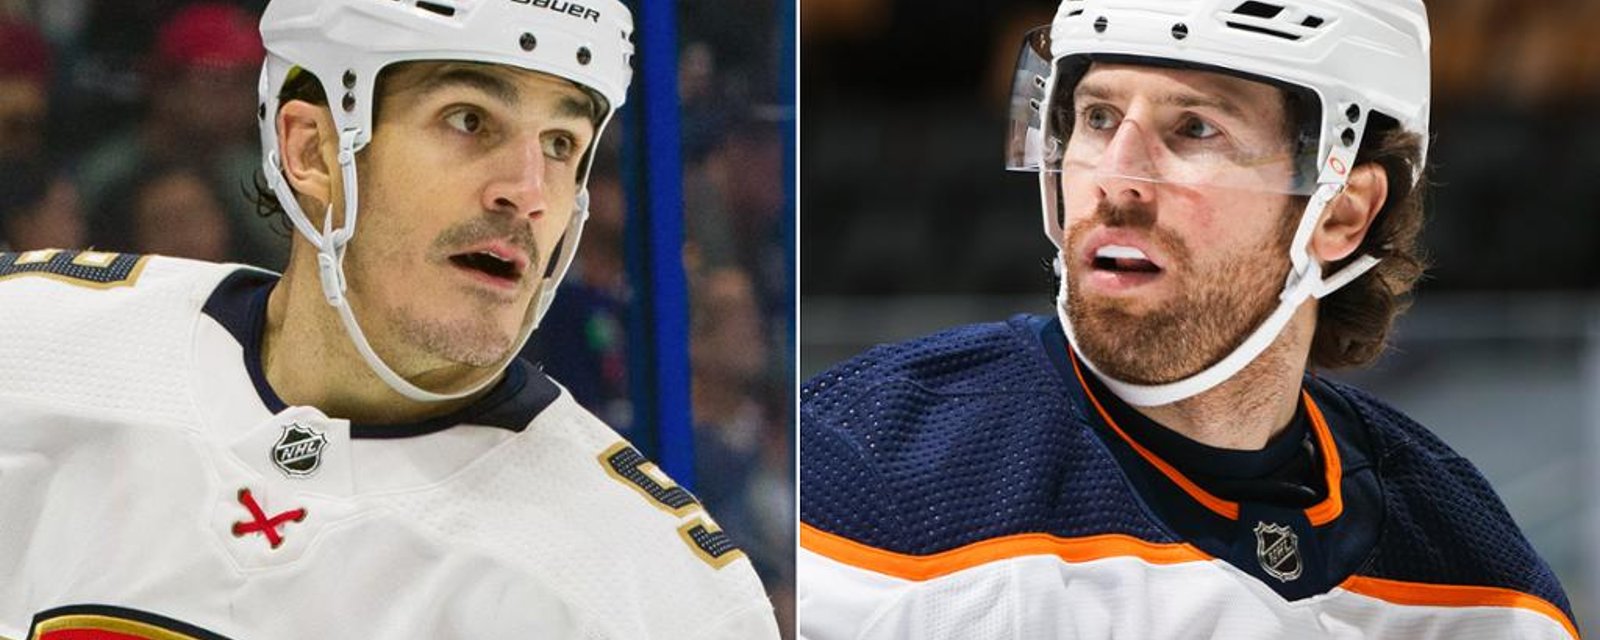 28 veterans attend training camps on PTO: who gets a deal? 